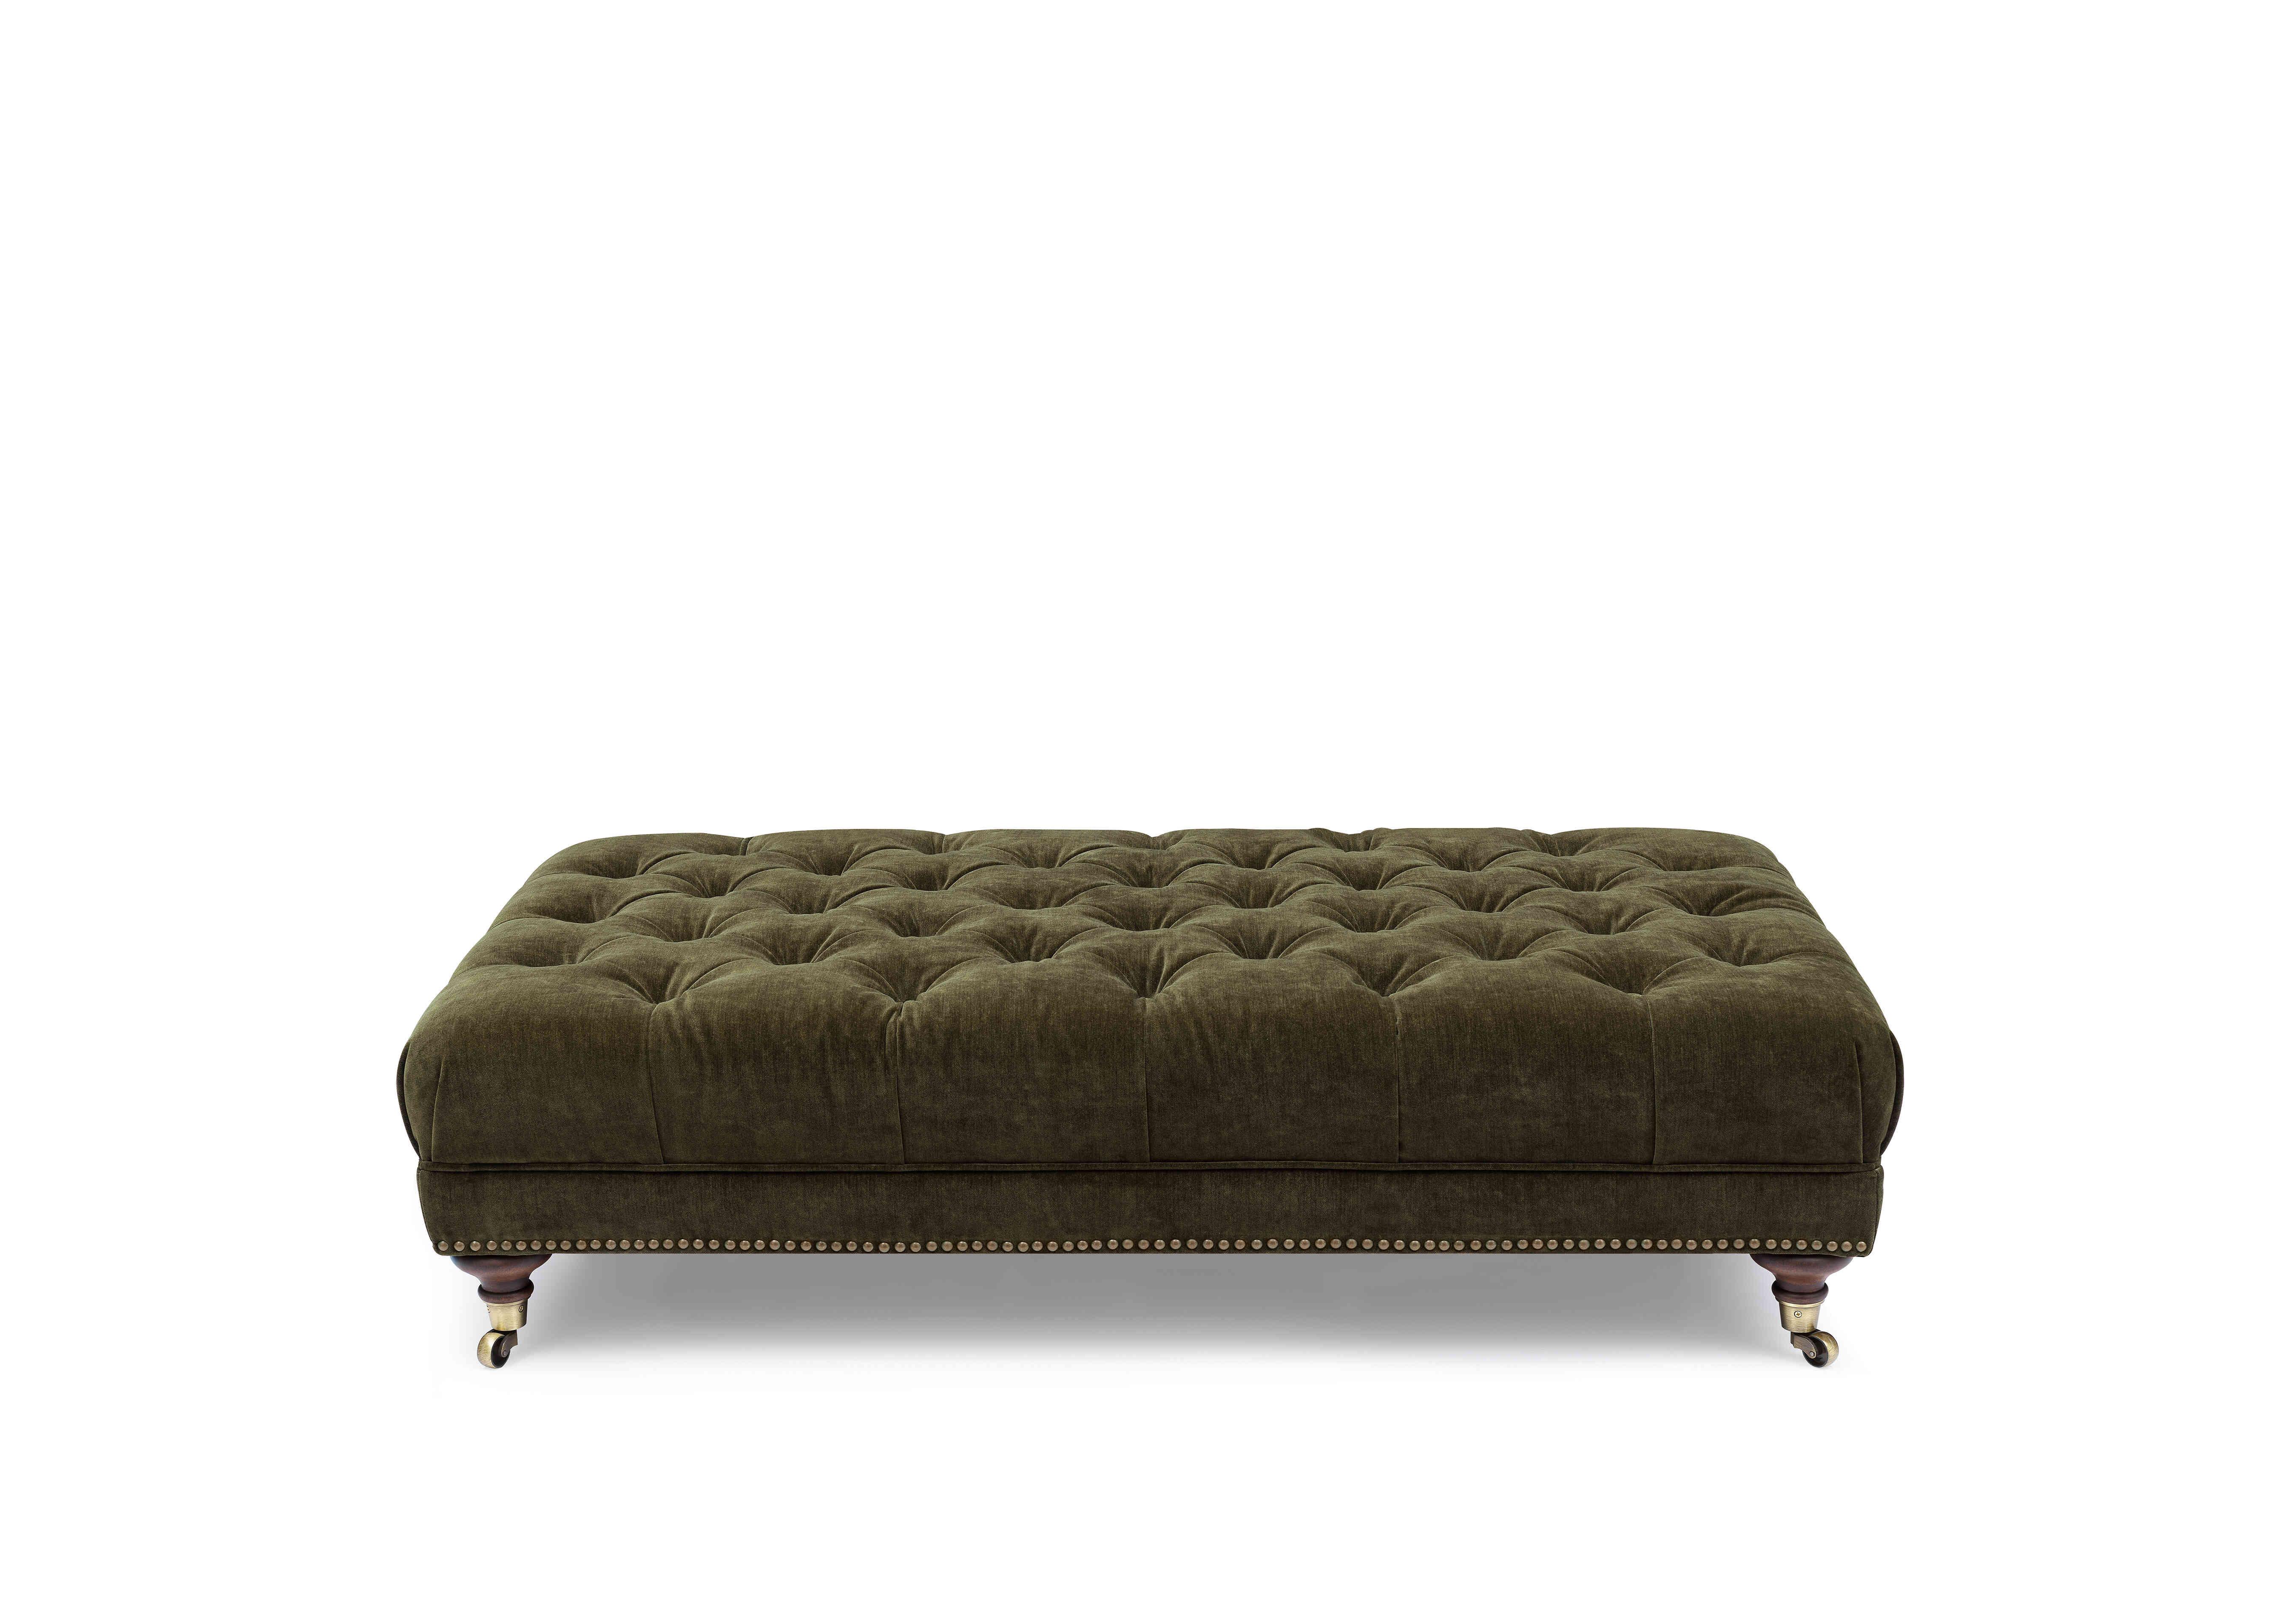 Wallace Fabric Rectangular Footstool with Castors in X3y1-W018 Pine on Furniture Village